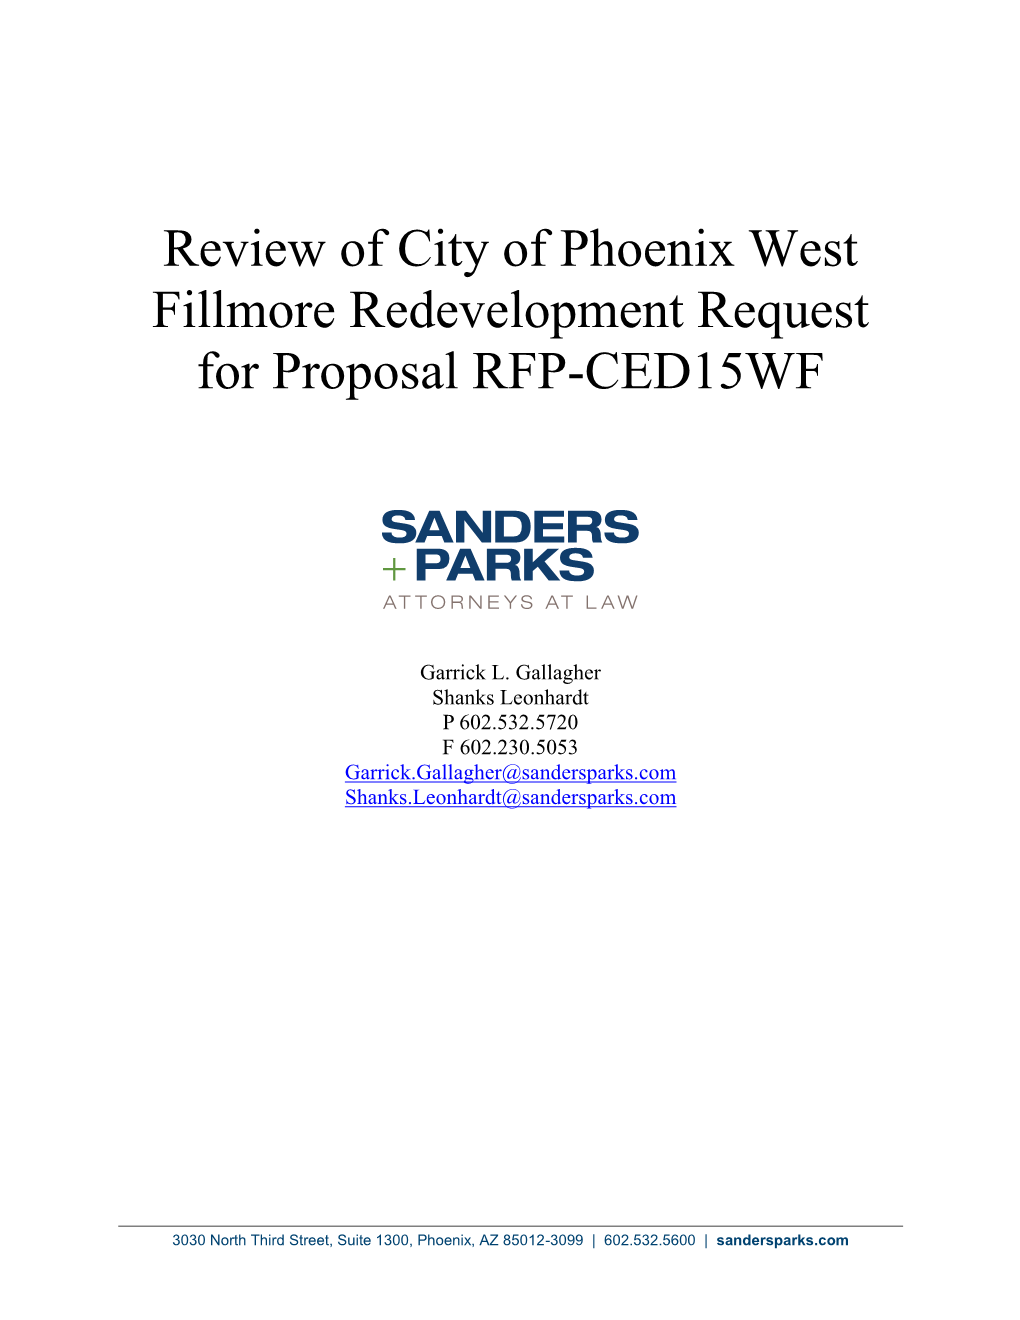 Review of City of Phoenix West Fillmore Redevelopment Request for Proposal RFP-CED15WF